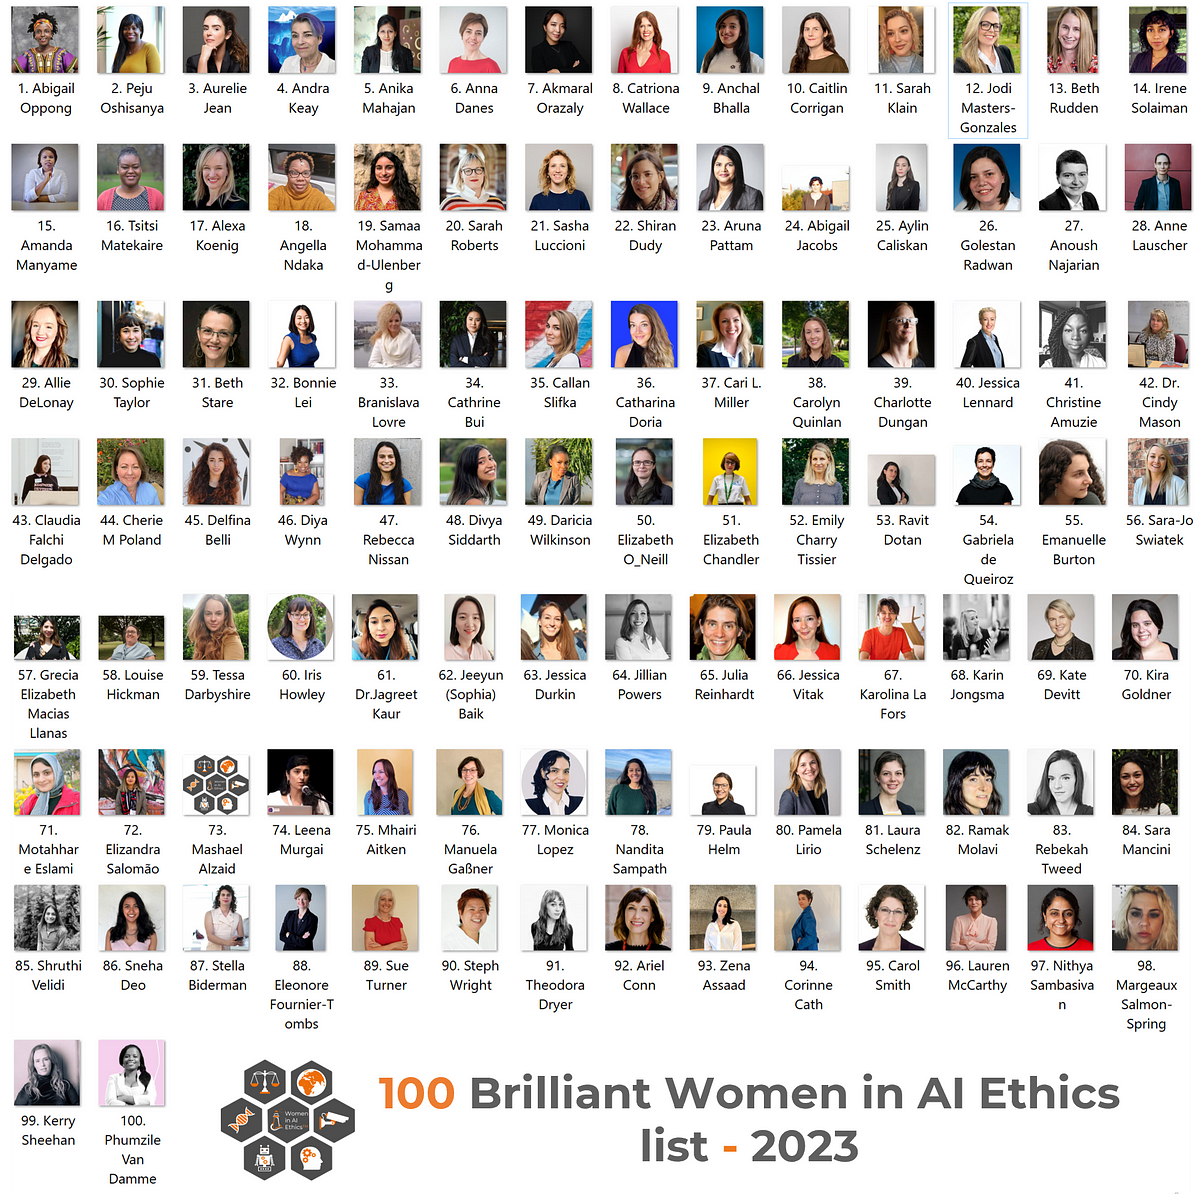 Announcing the ‘100 Brilliant Women in AI Ethics’ list for 2023